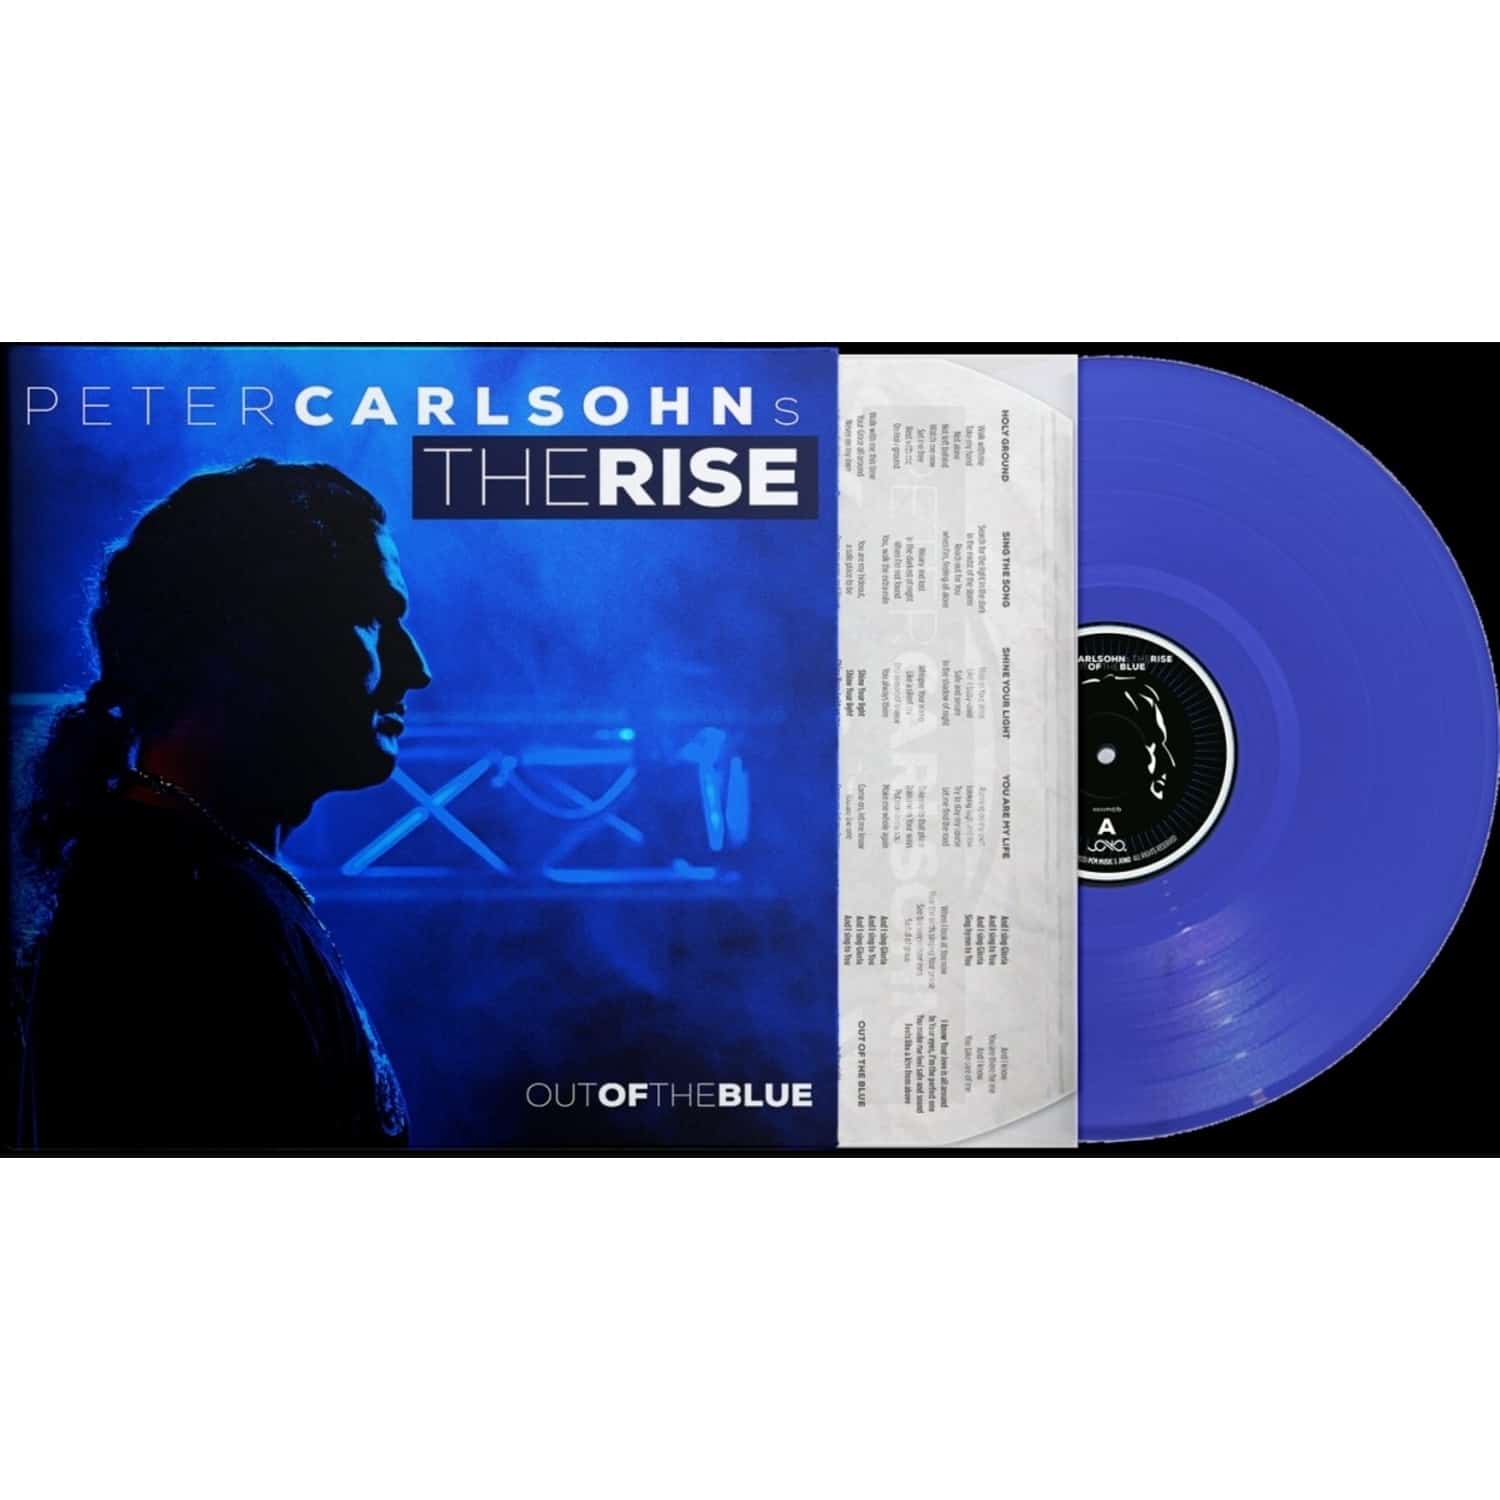 Peter Carlsohn s The Rise - OUT OF THE BLUE 